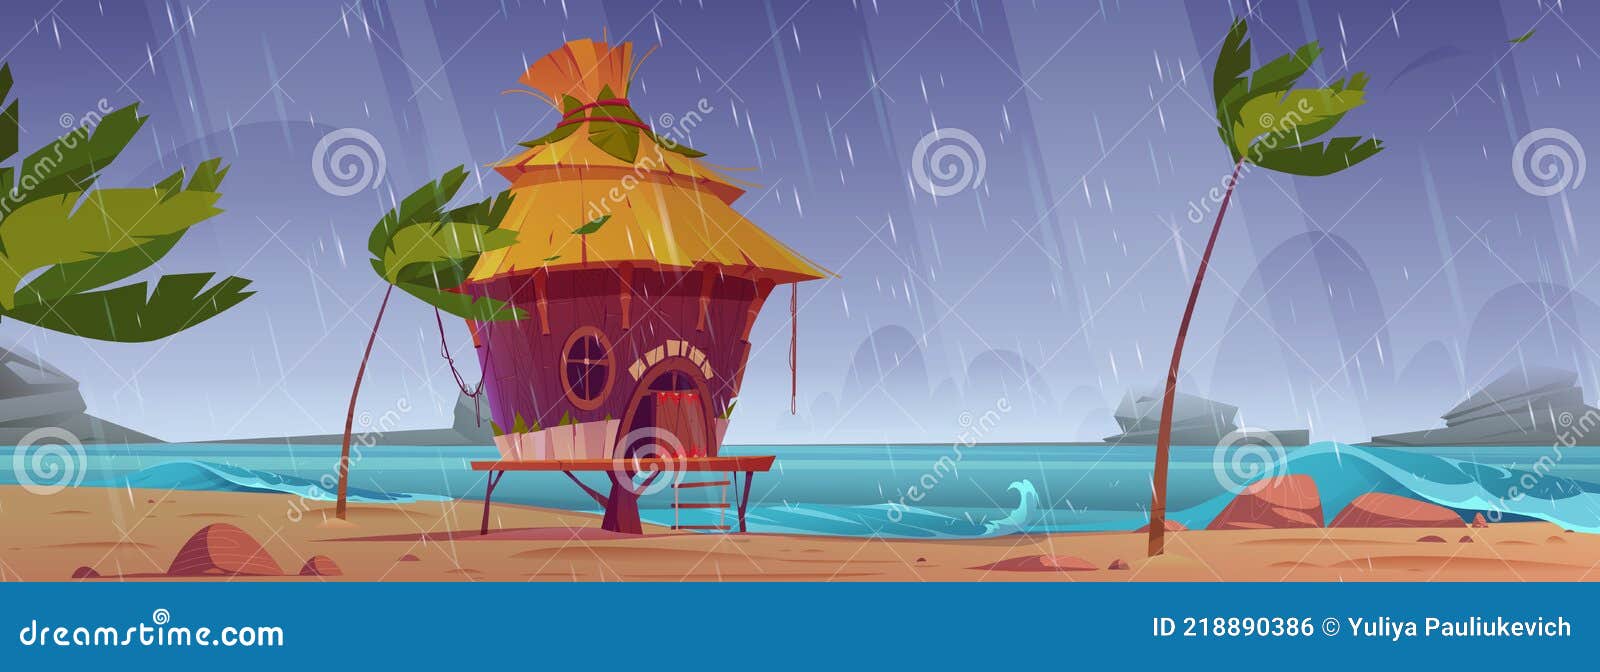 Storm on Beach with Hut or Bungalow Under Rain Stock Vector ...